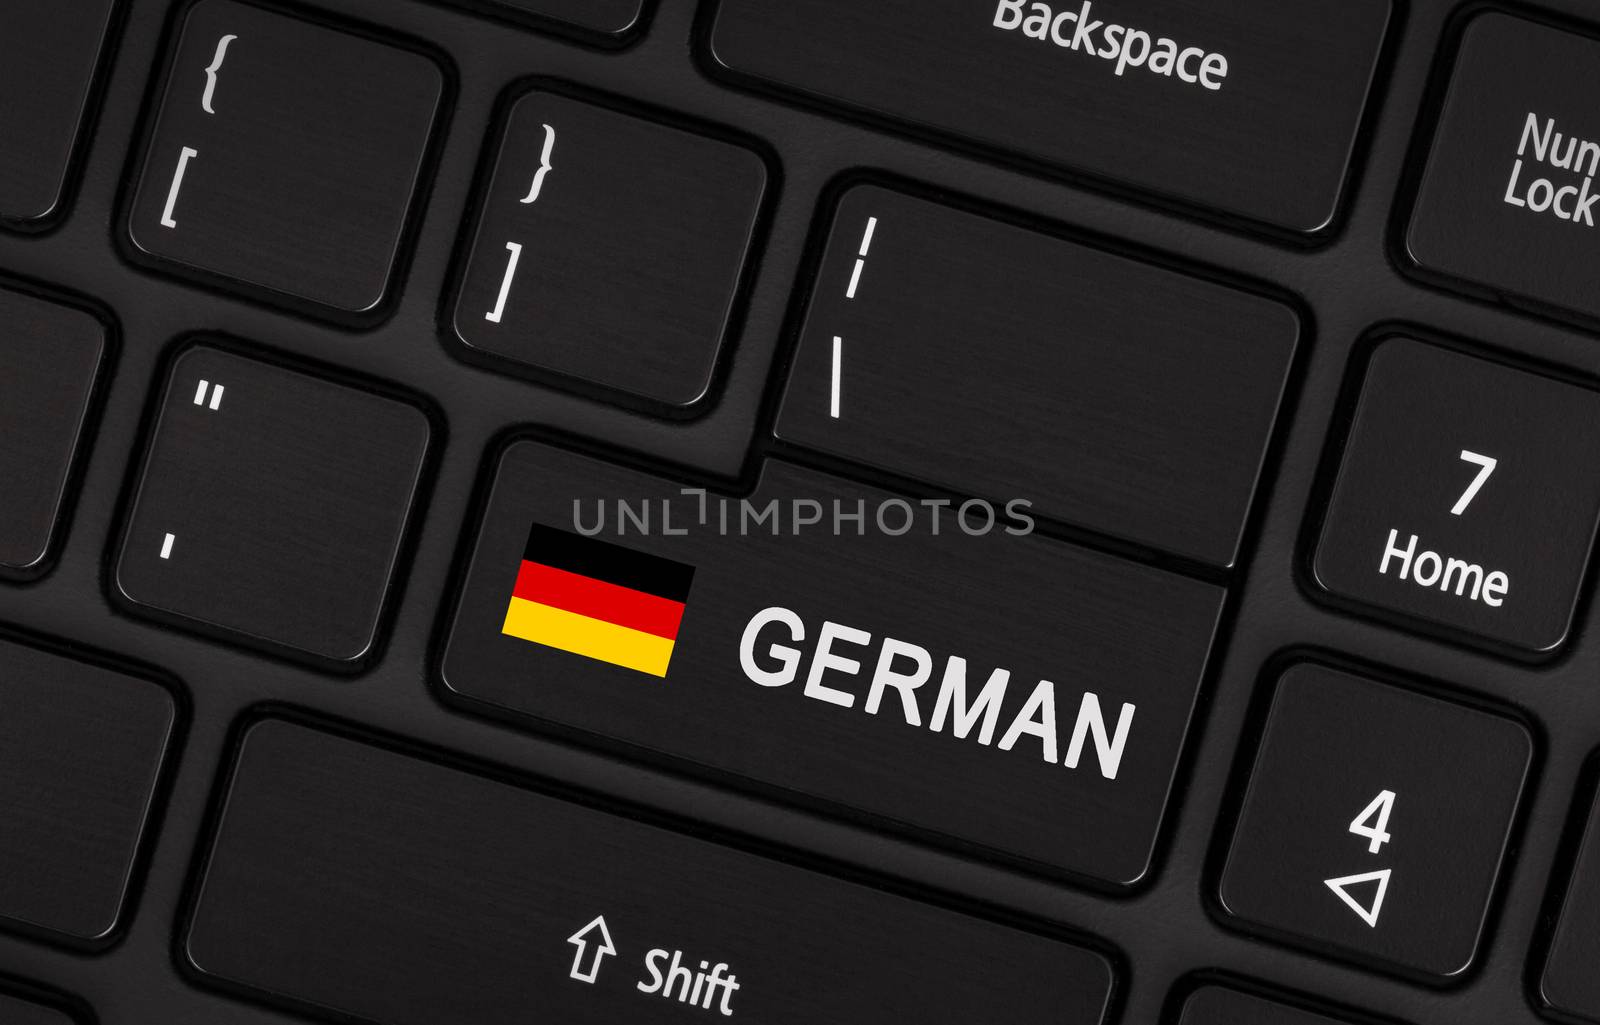 Enter button with flag Germany - Concept of language (learning or translate)